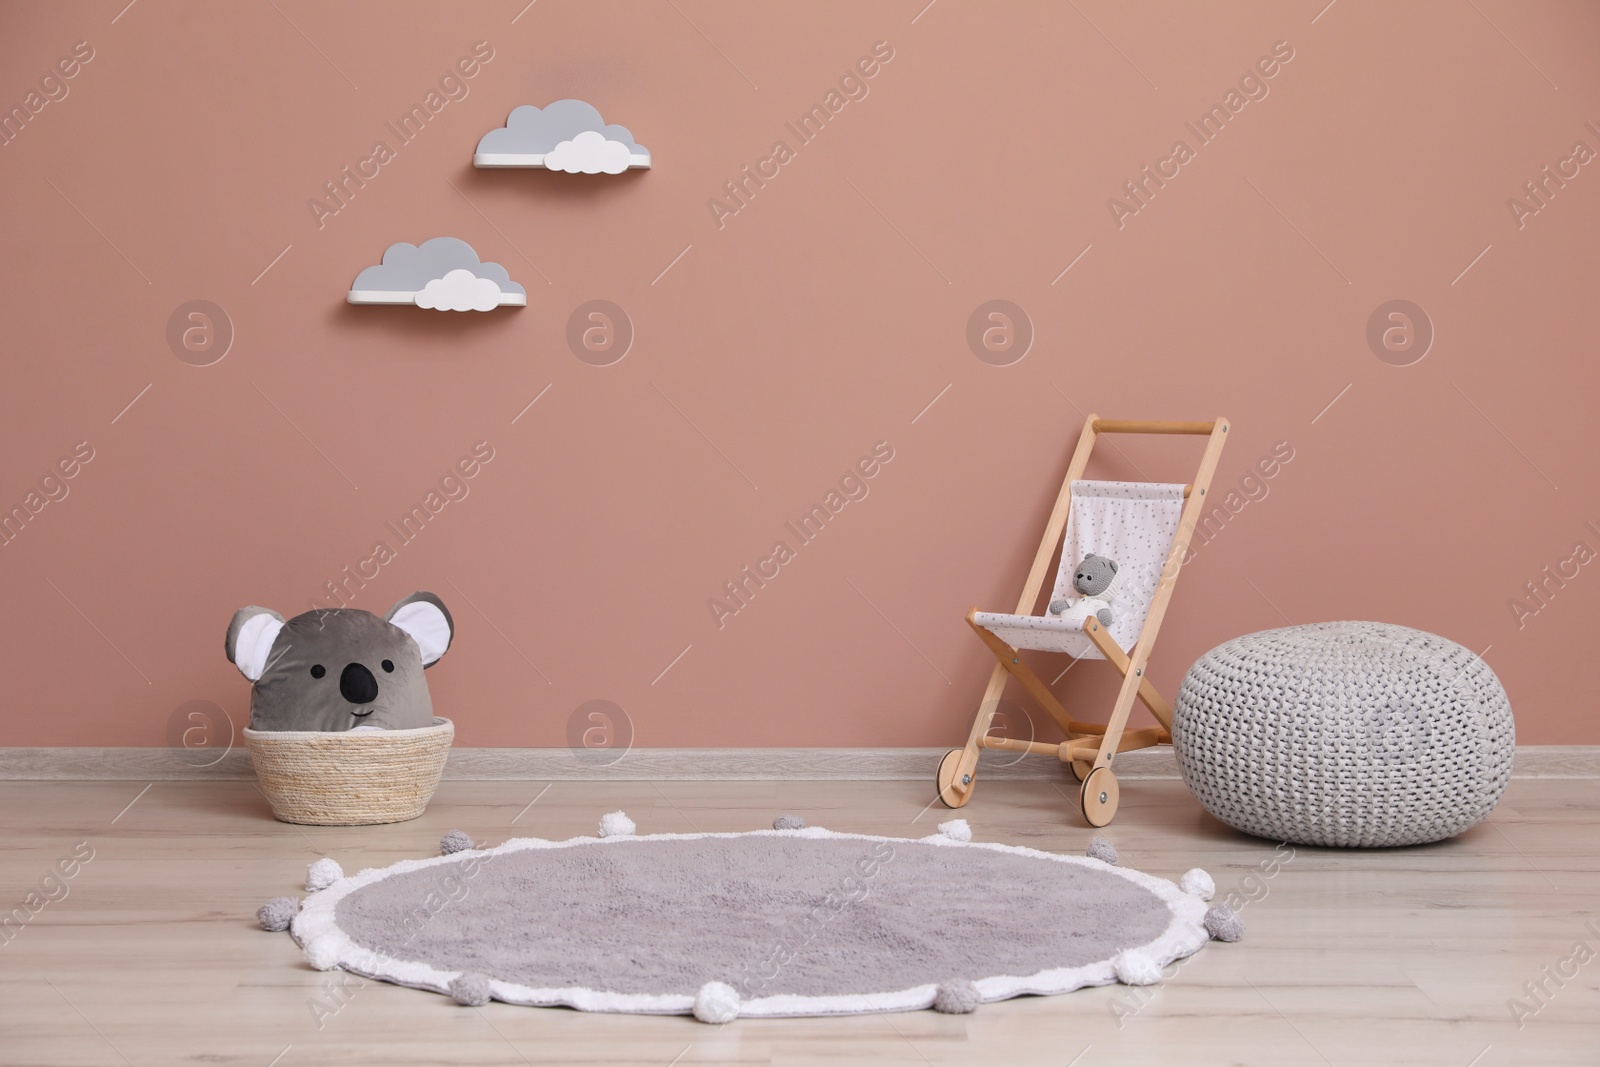 Photo of Wicker basket, toys and pouf near pink wall indoors. Interior design